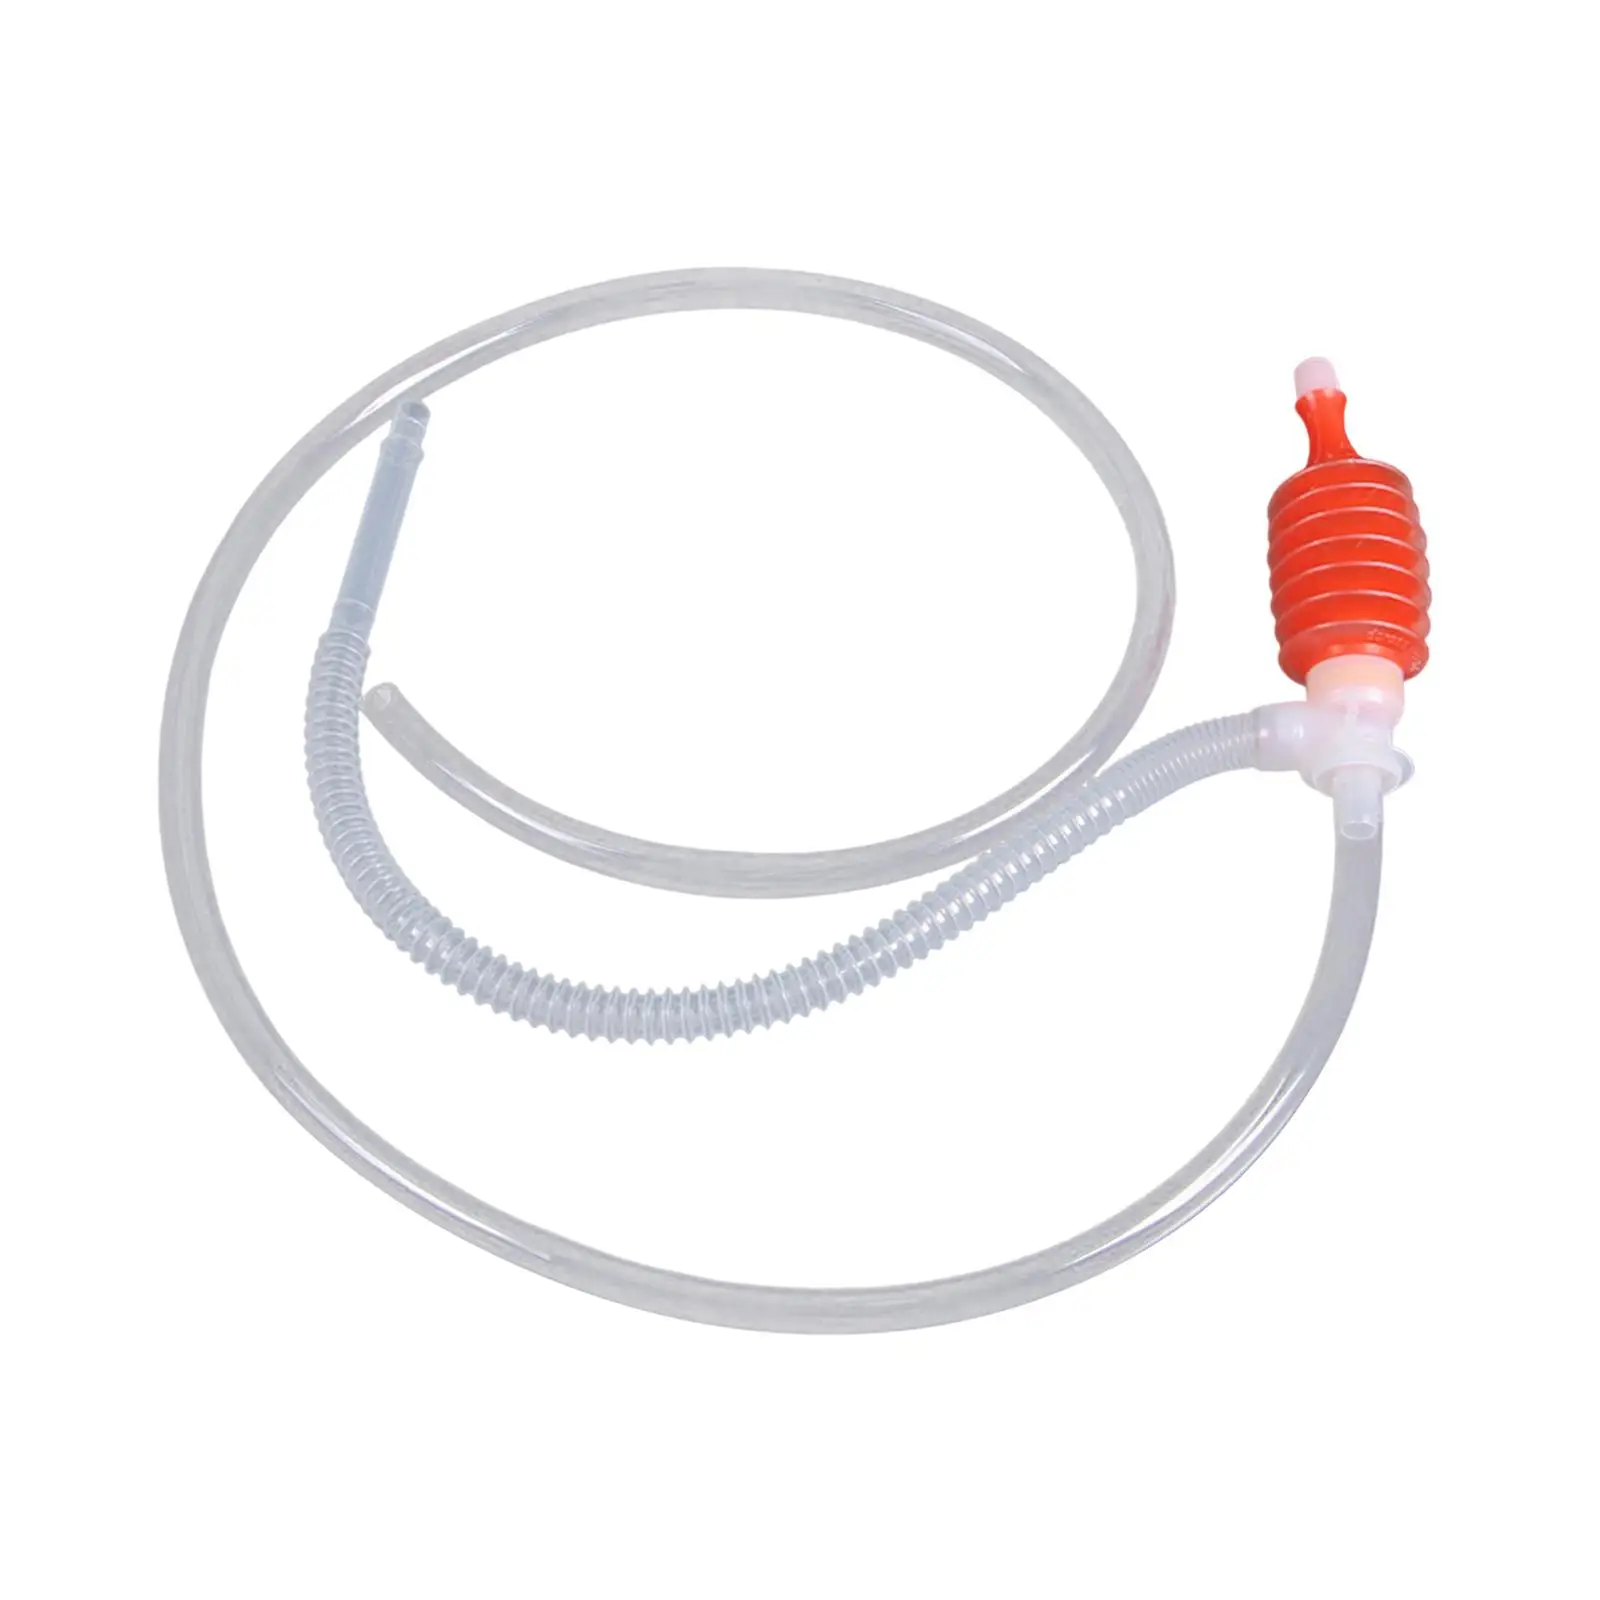 Portable Manual Siphon Pump Clear Oilproof Oil Fluid Extractor hand petrol Transfer Pump for Automotive Gasoline Water Petrol